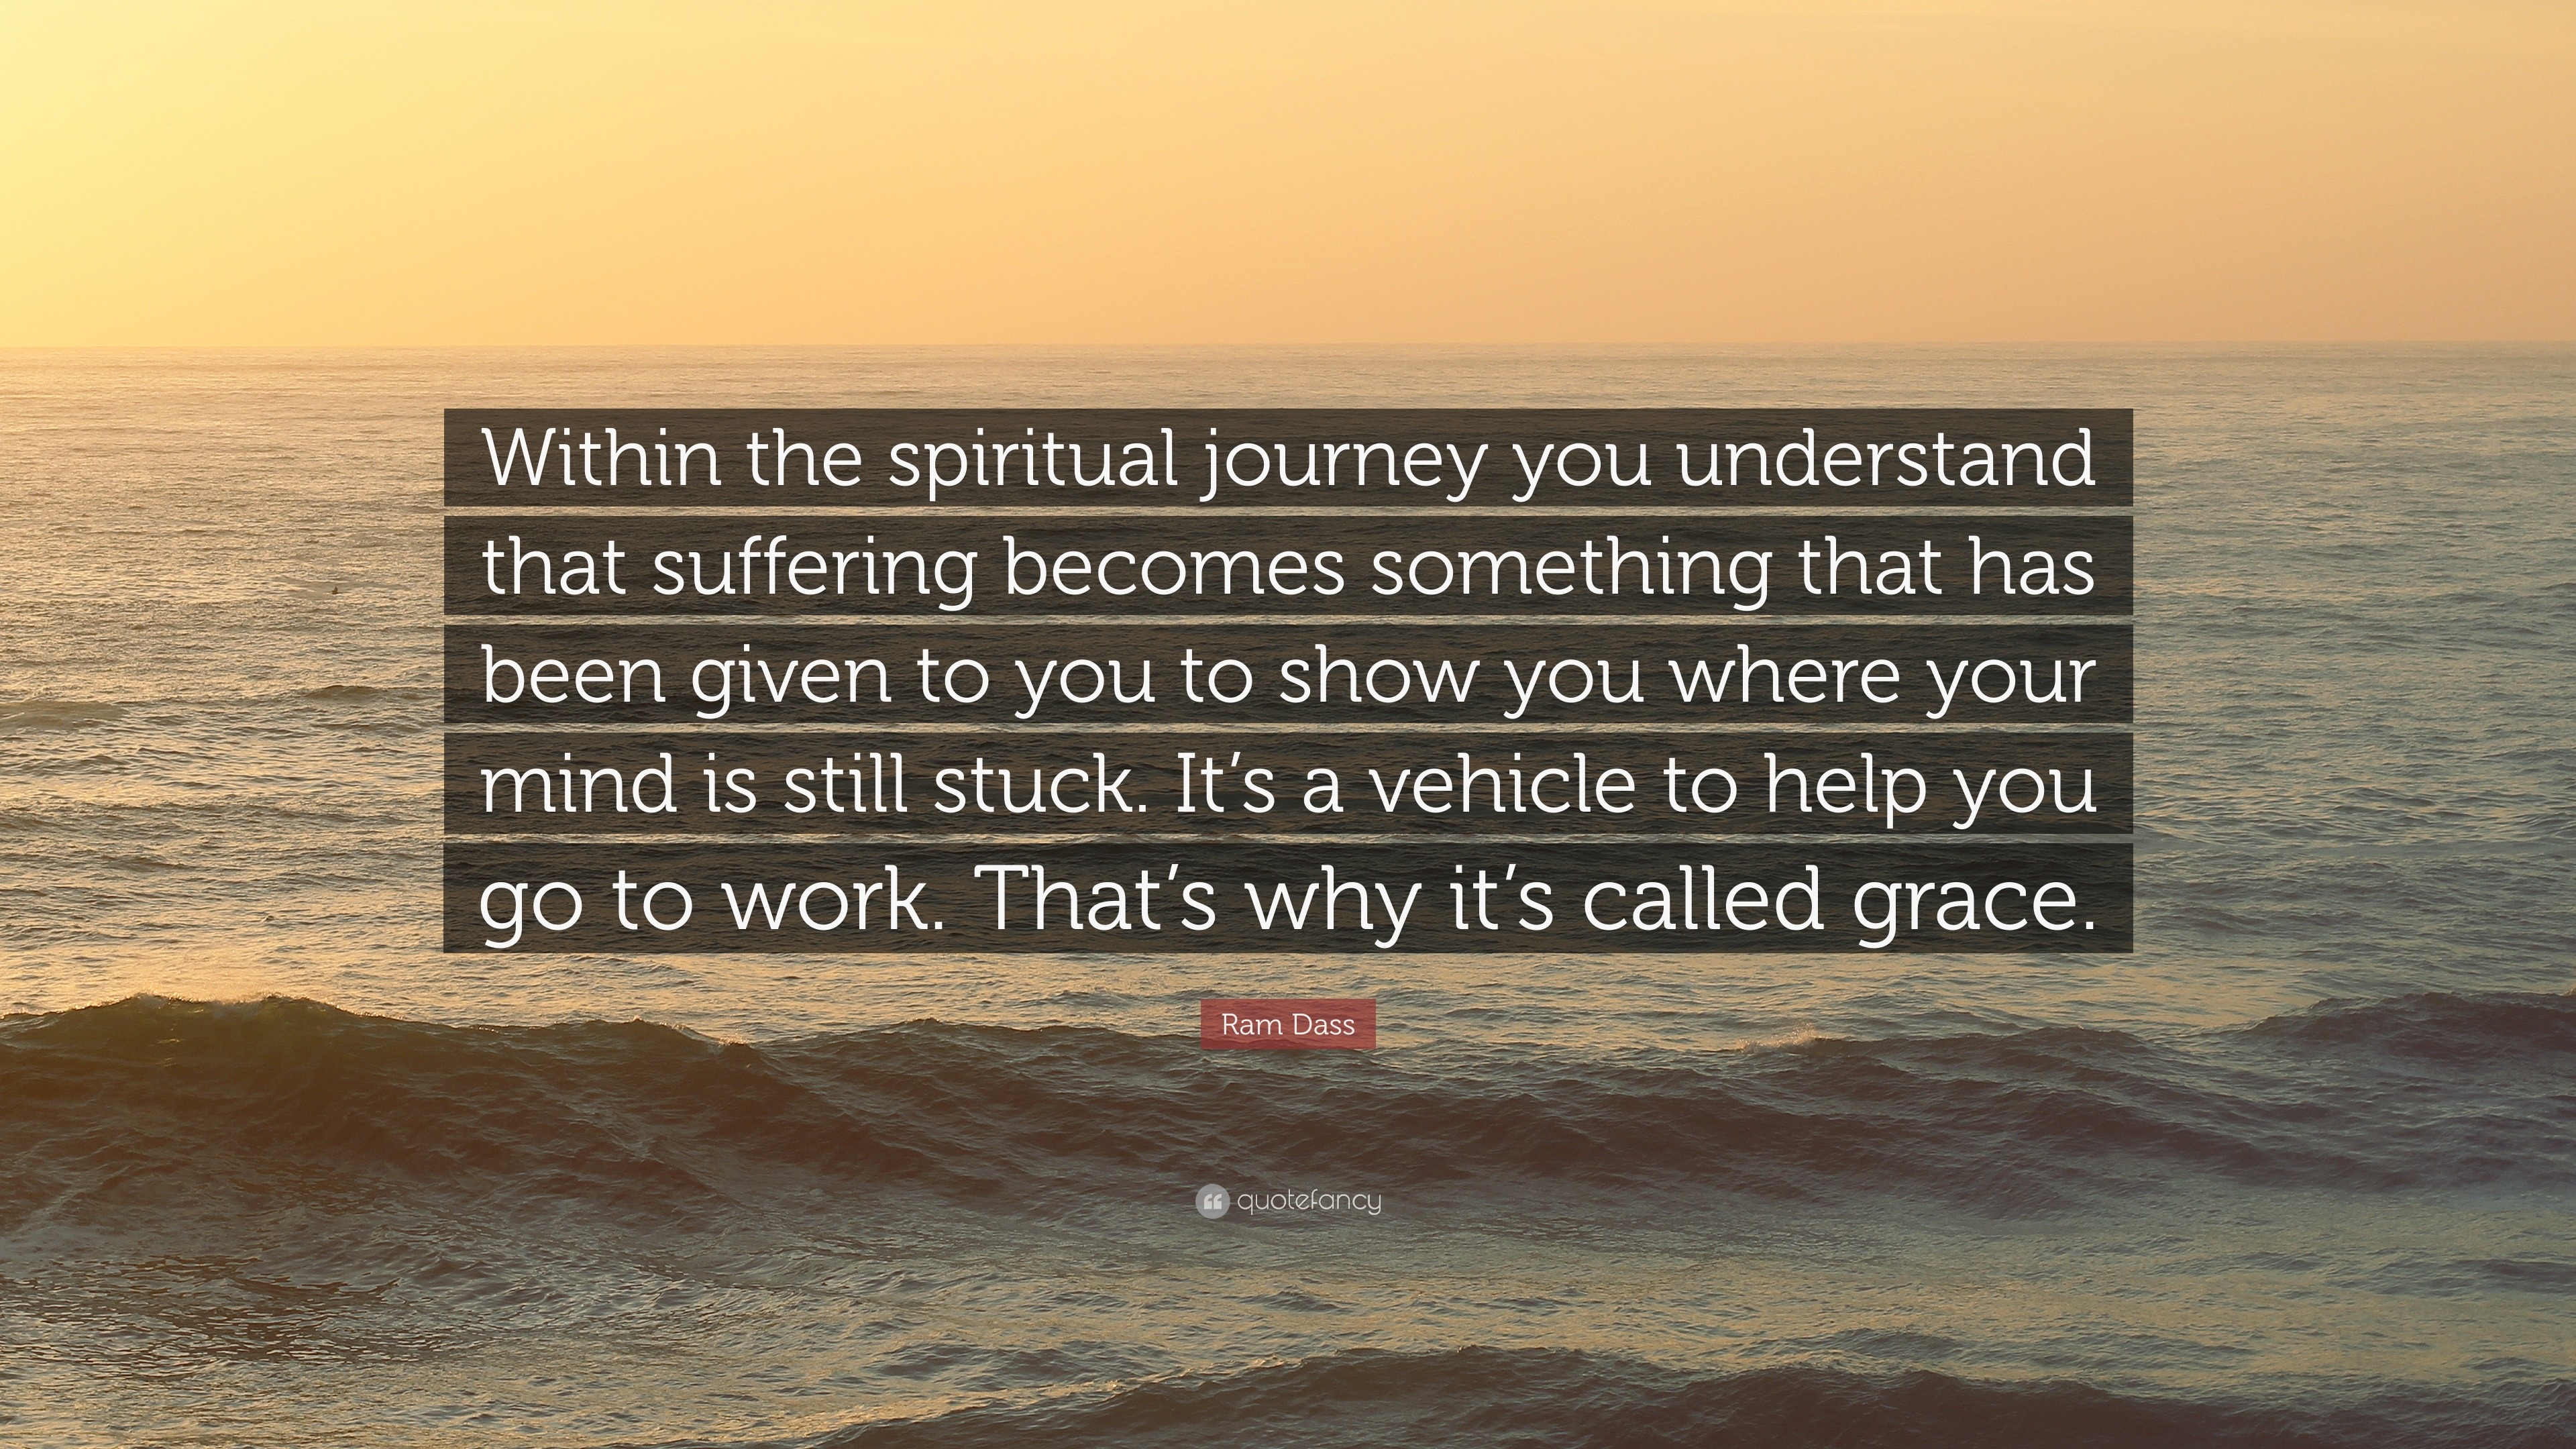 Ram Dass Quote: “Within the spiritual journey you understand that ...